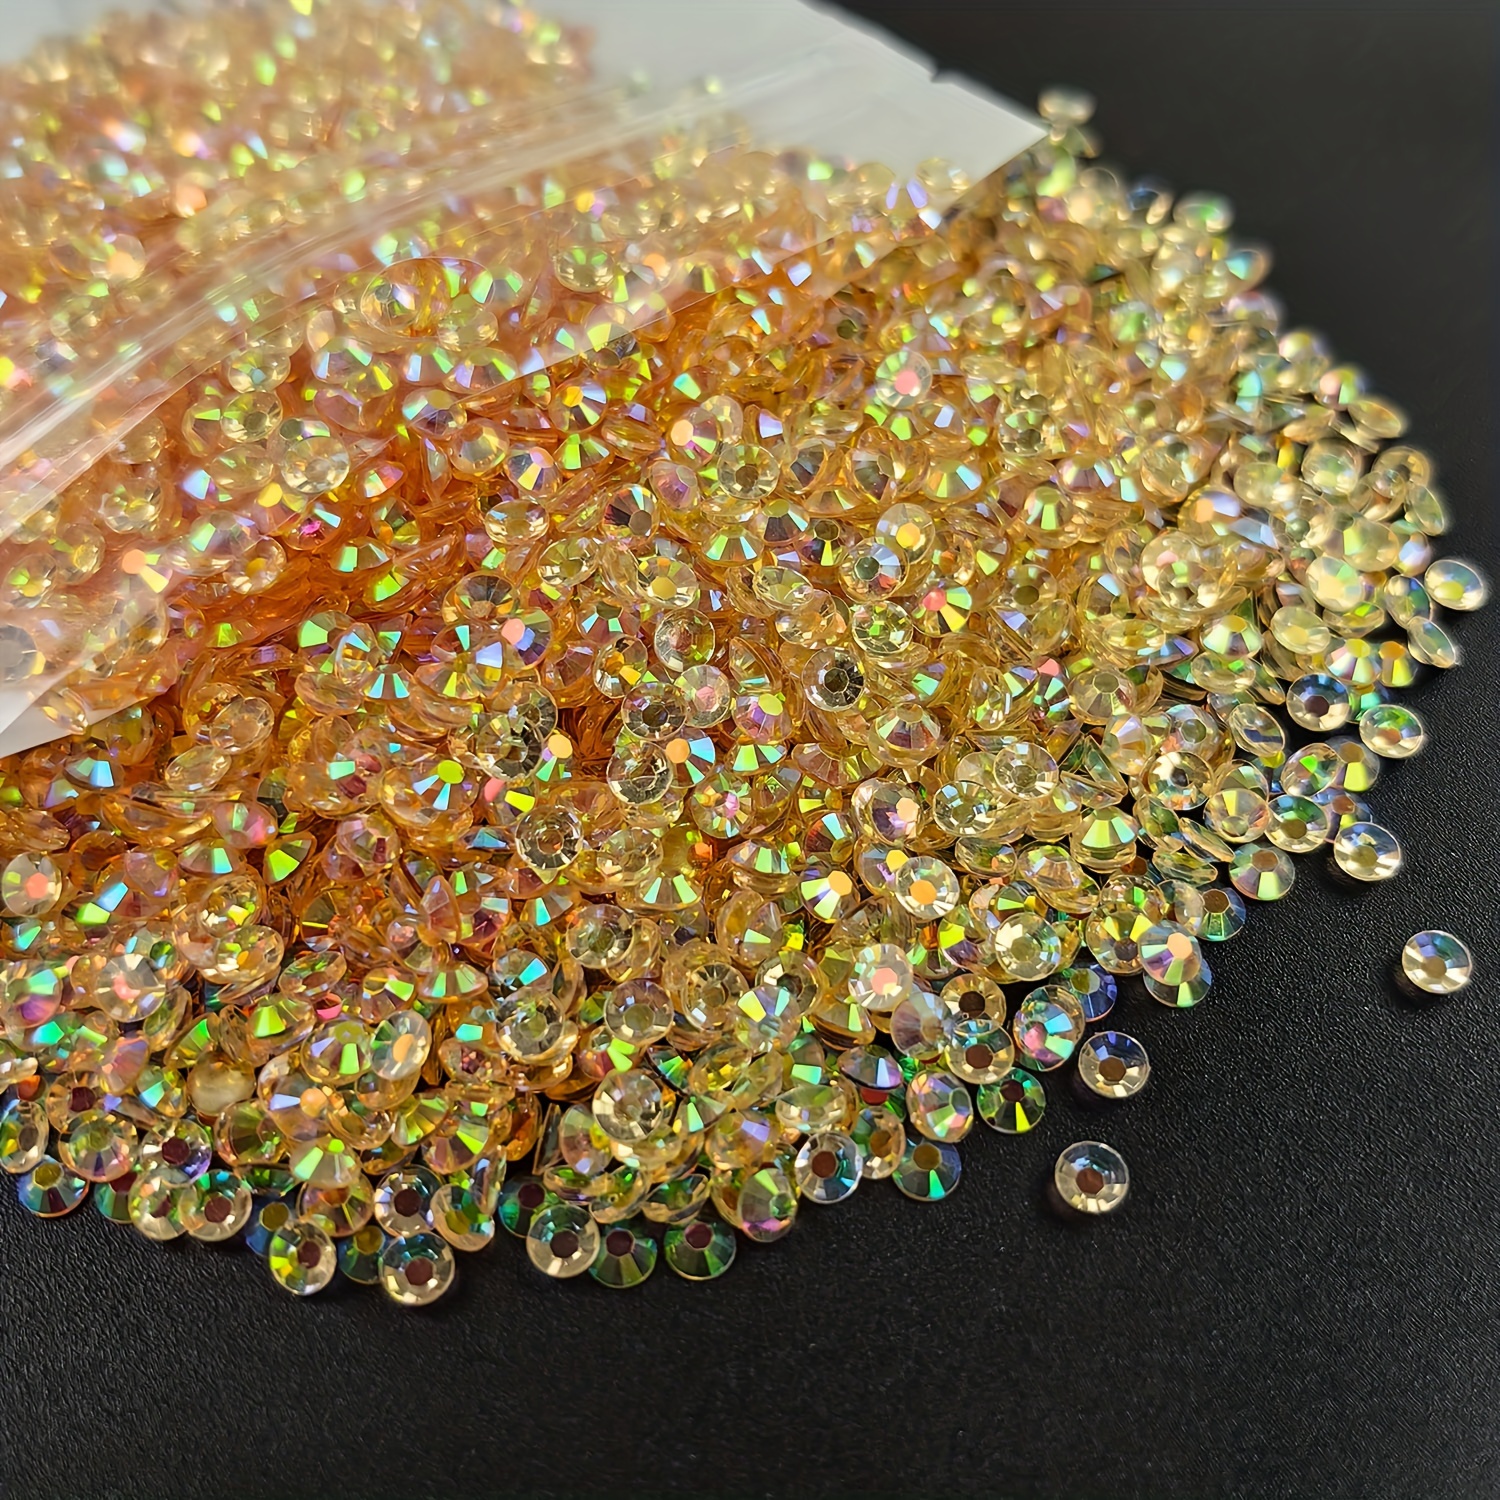 Transparent ab Rhinestones 2mm-6mm you select size